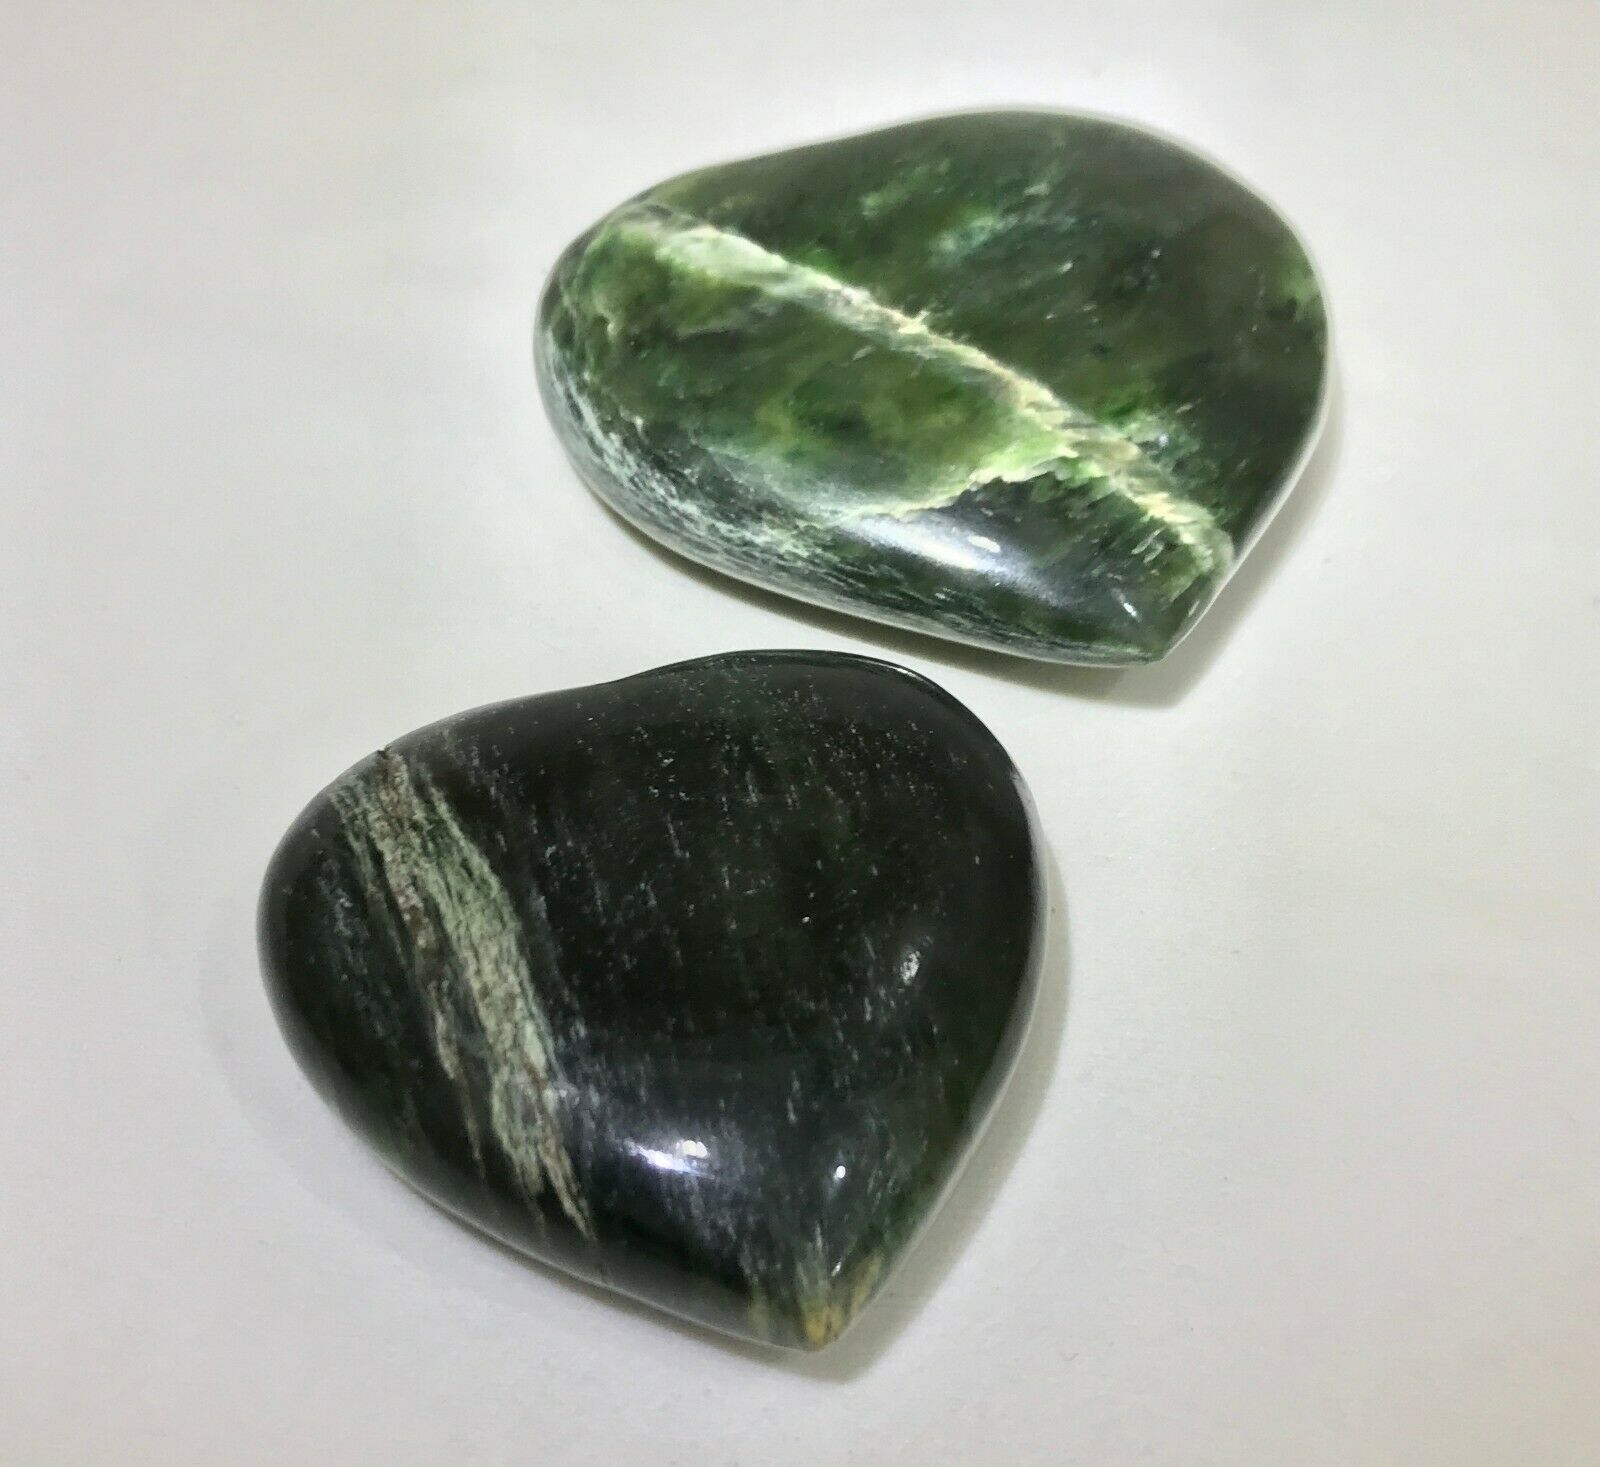 2 Pieces Green Jade Nephrite Hearts ' Rocks And Minerals, Gift Stone Jade '